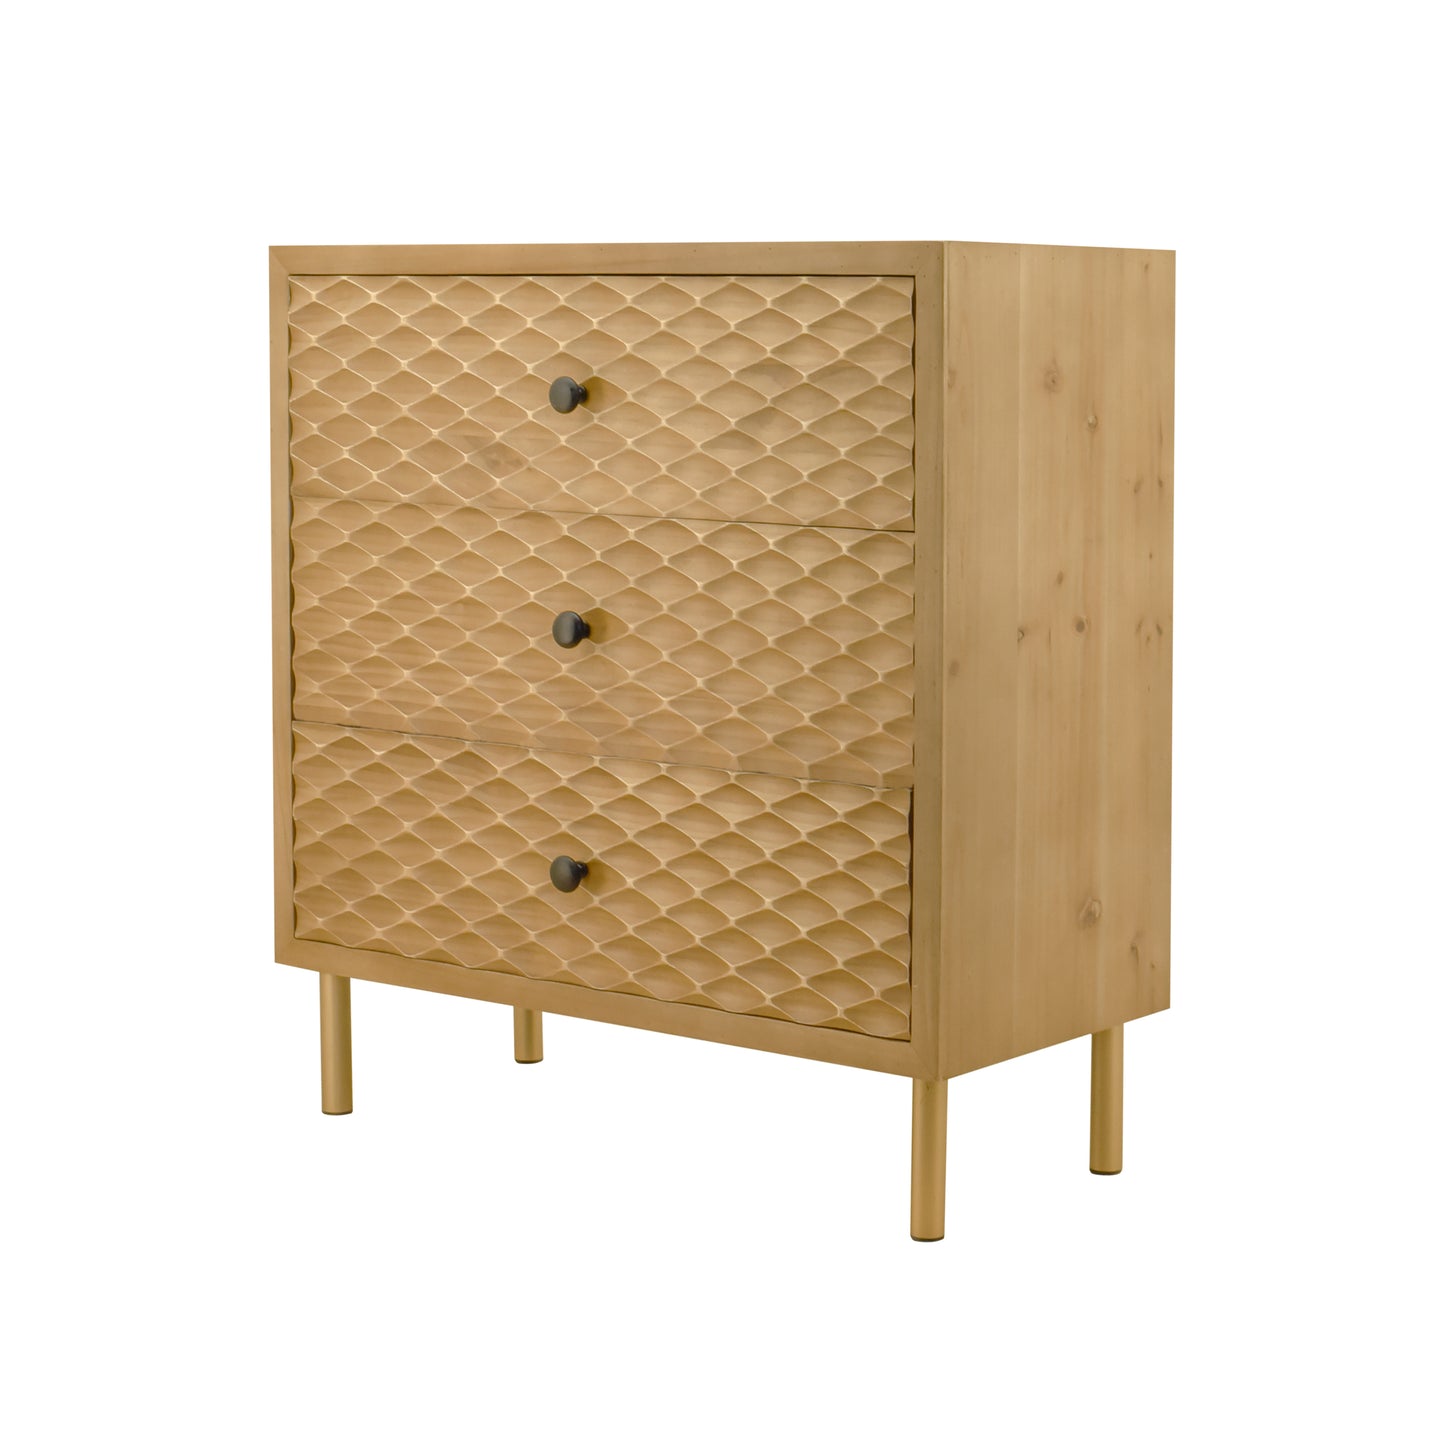 Wooden Accent Storage Cabinet with 3 Drawers, Bachelors Chest for Bedroom, Living Room